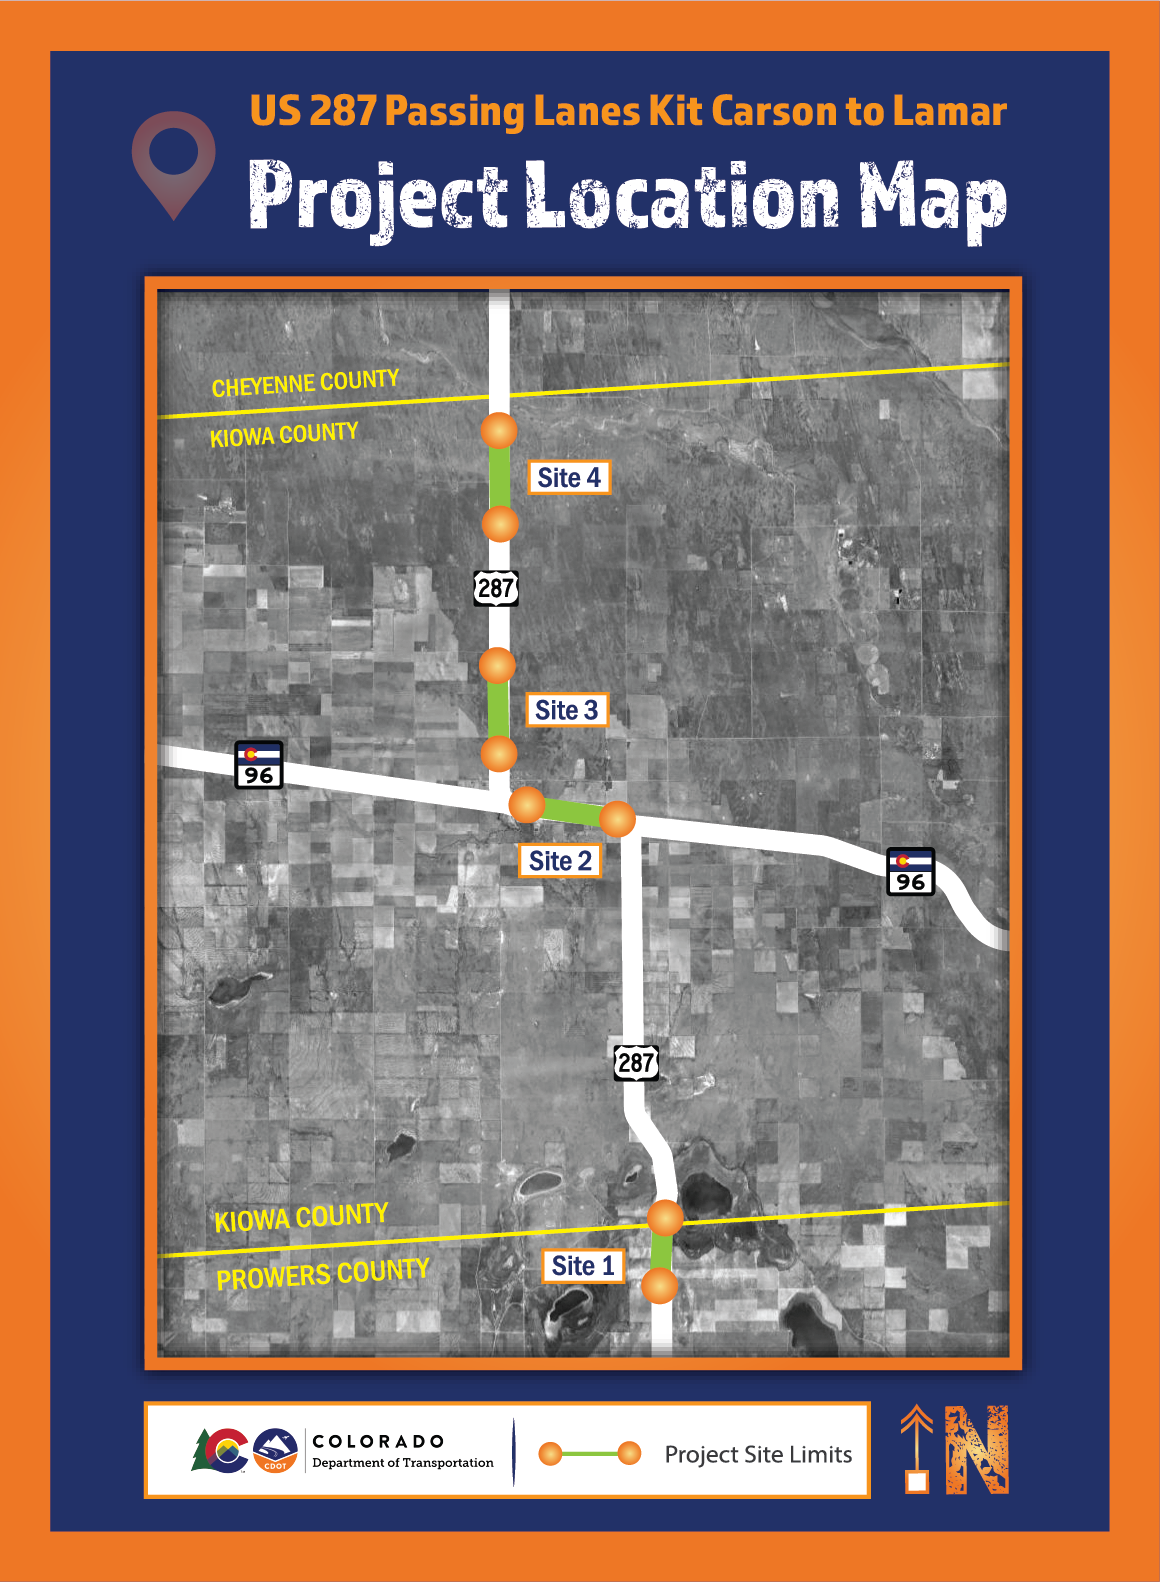 US 287 Passing Kit Carson Project Location Map v1 1.6.2021-01 (1).png detail image